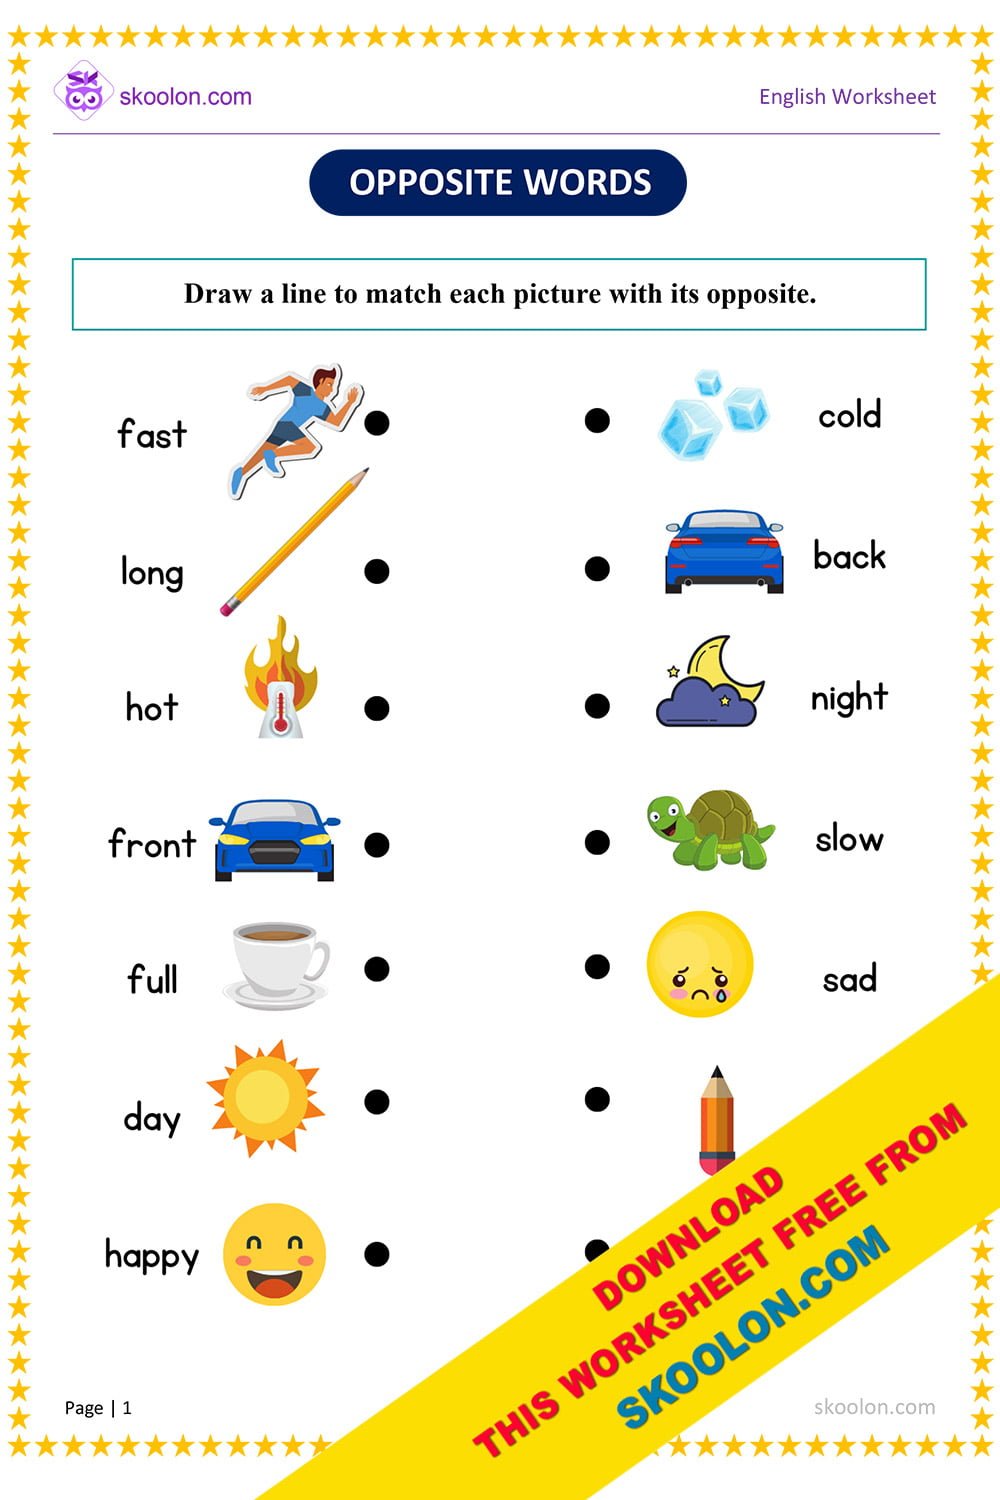 Opposite Words Worksheet For Class 4 With Answers